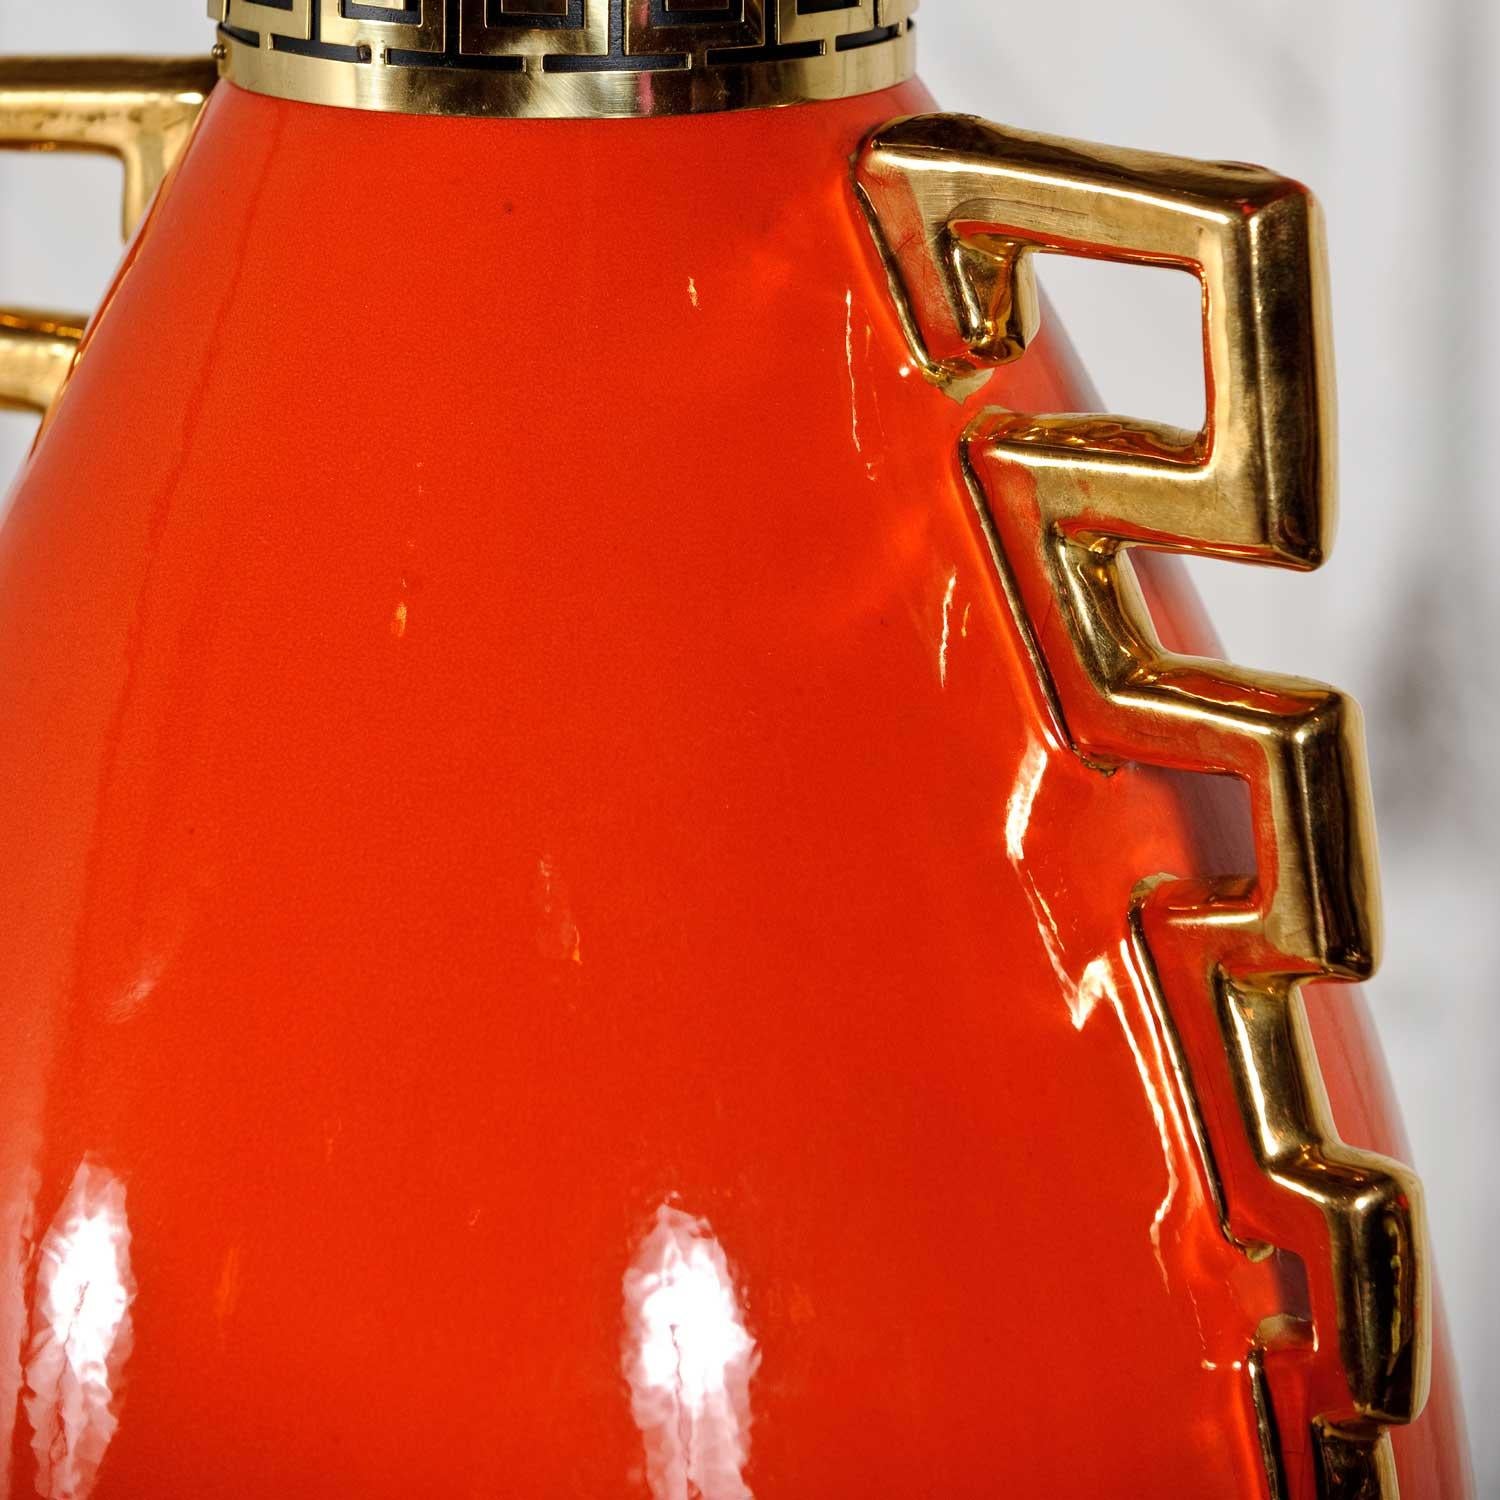 Gorgeous monumental Hollywood Regency bright red-orange and gold glazed ceramic lamp which is in the style of the infamous James Mont. It is in wonderful vintage condition with no outstanding flaws to the lamp itself. The huge black shade with